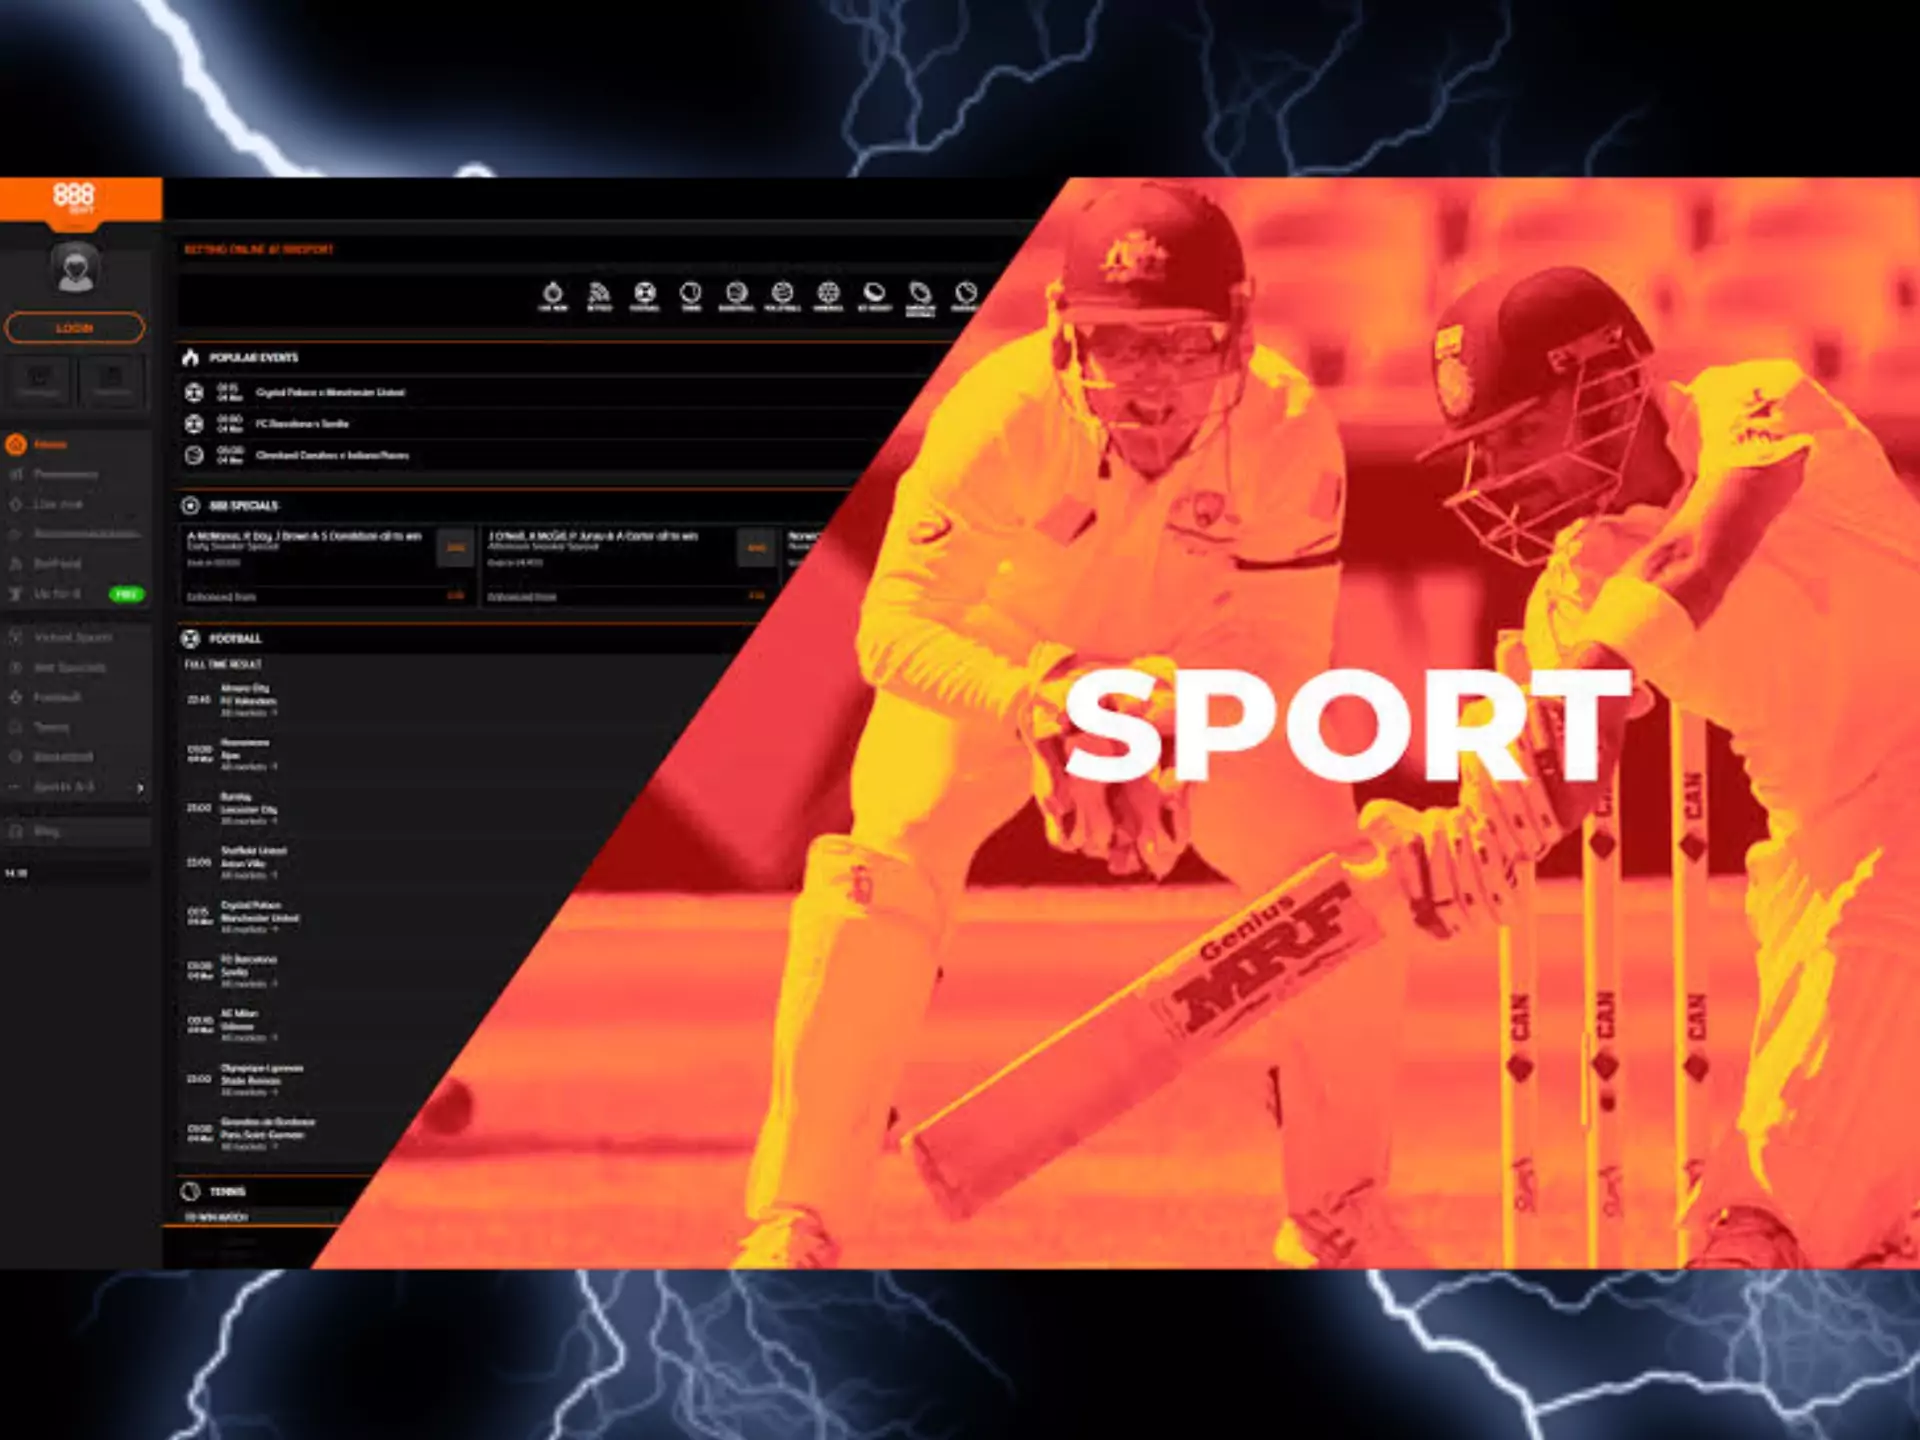 Choose 888sport to bet on cricket and IPL events.